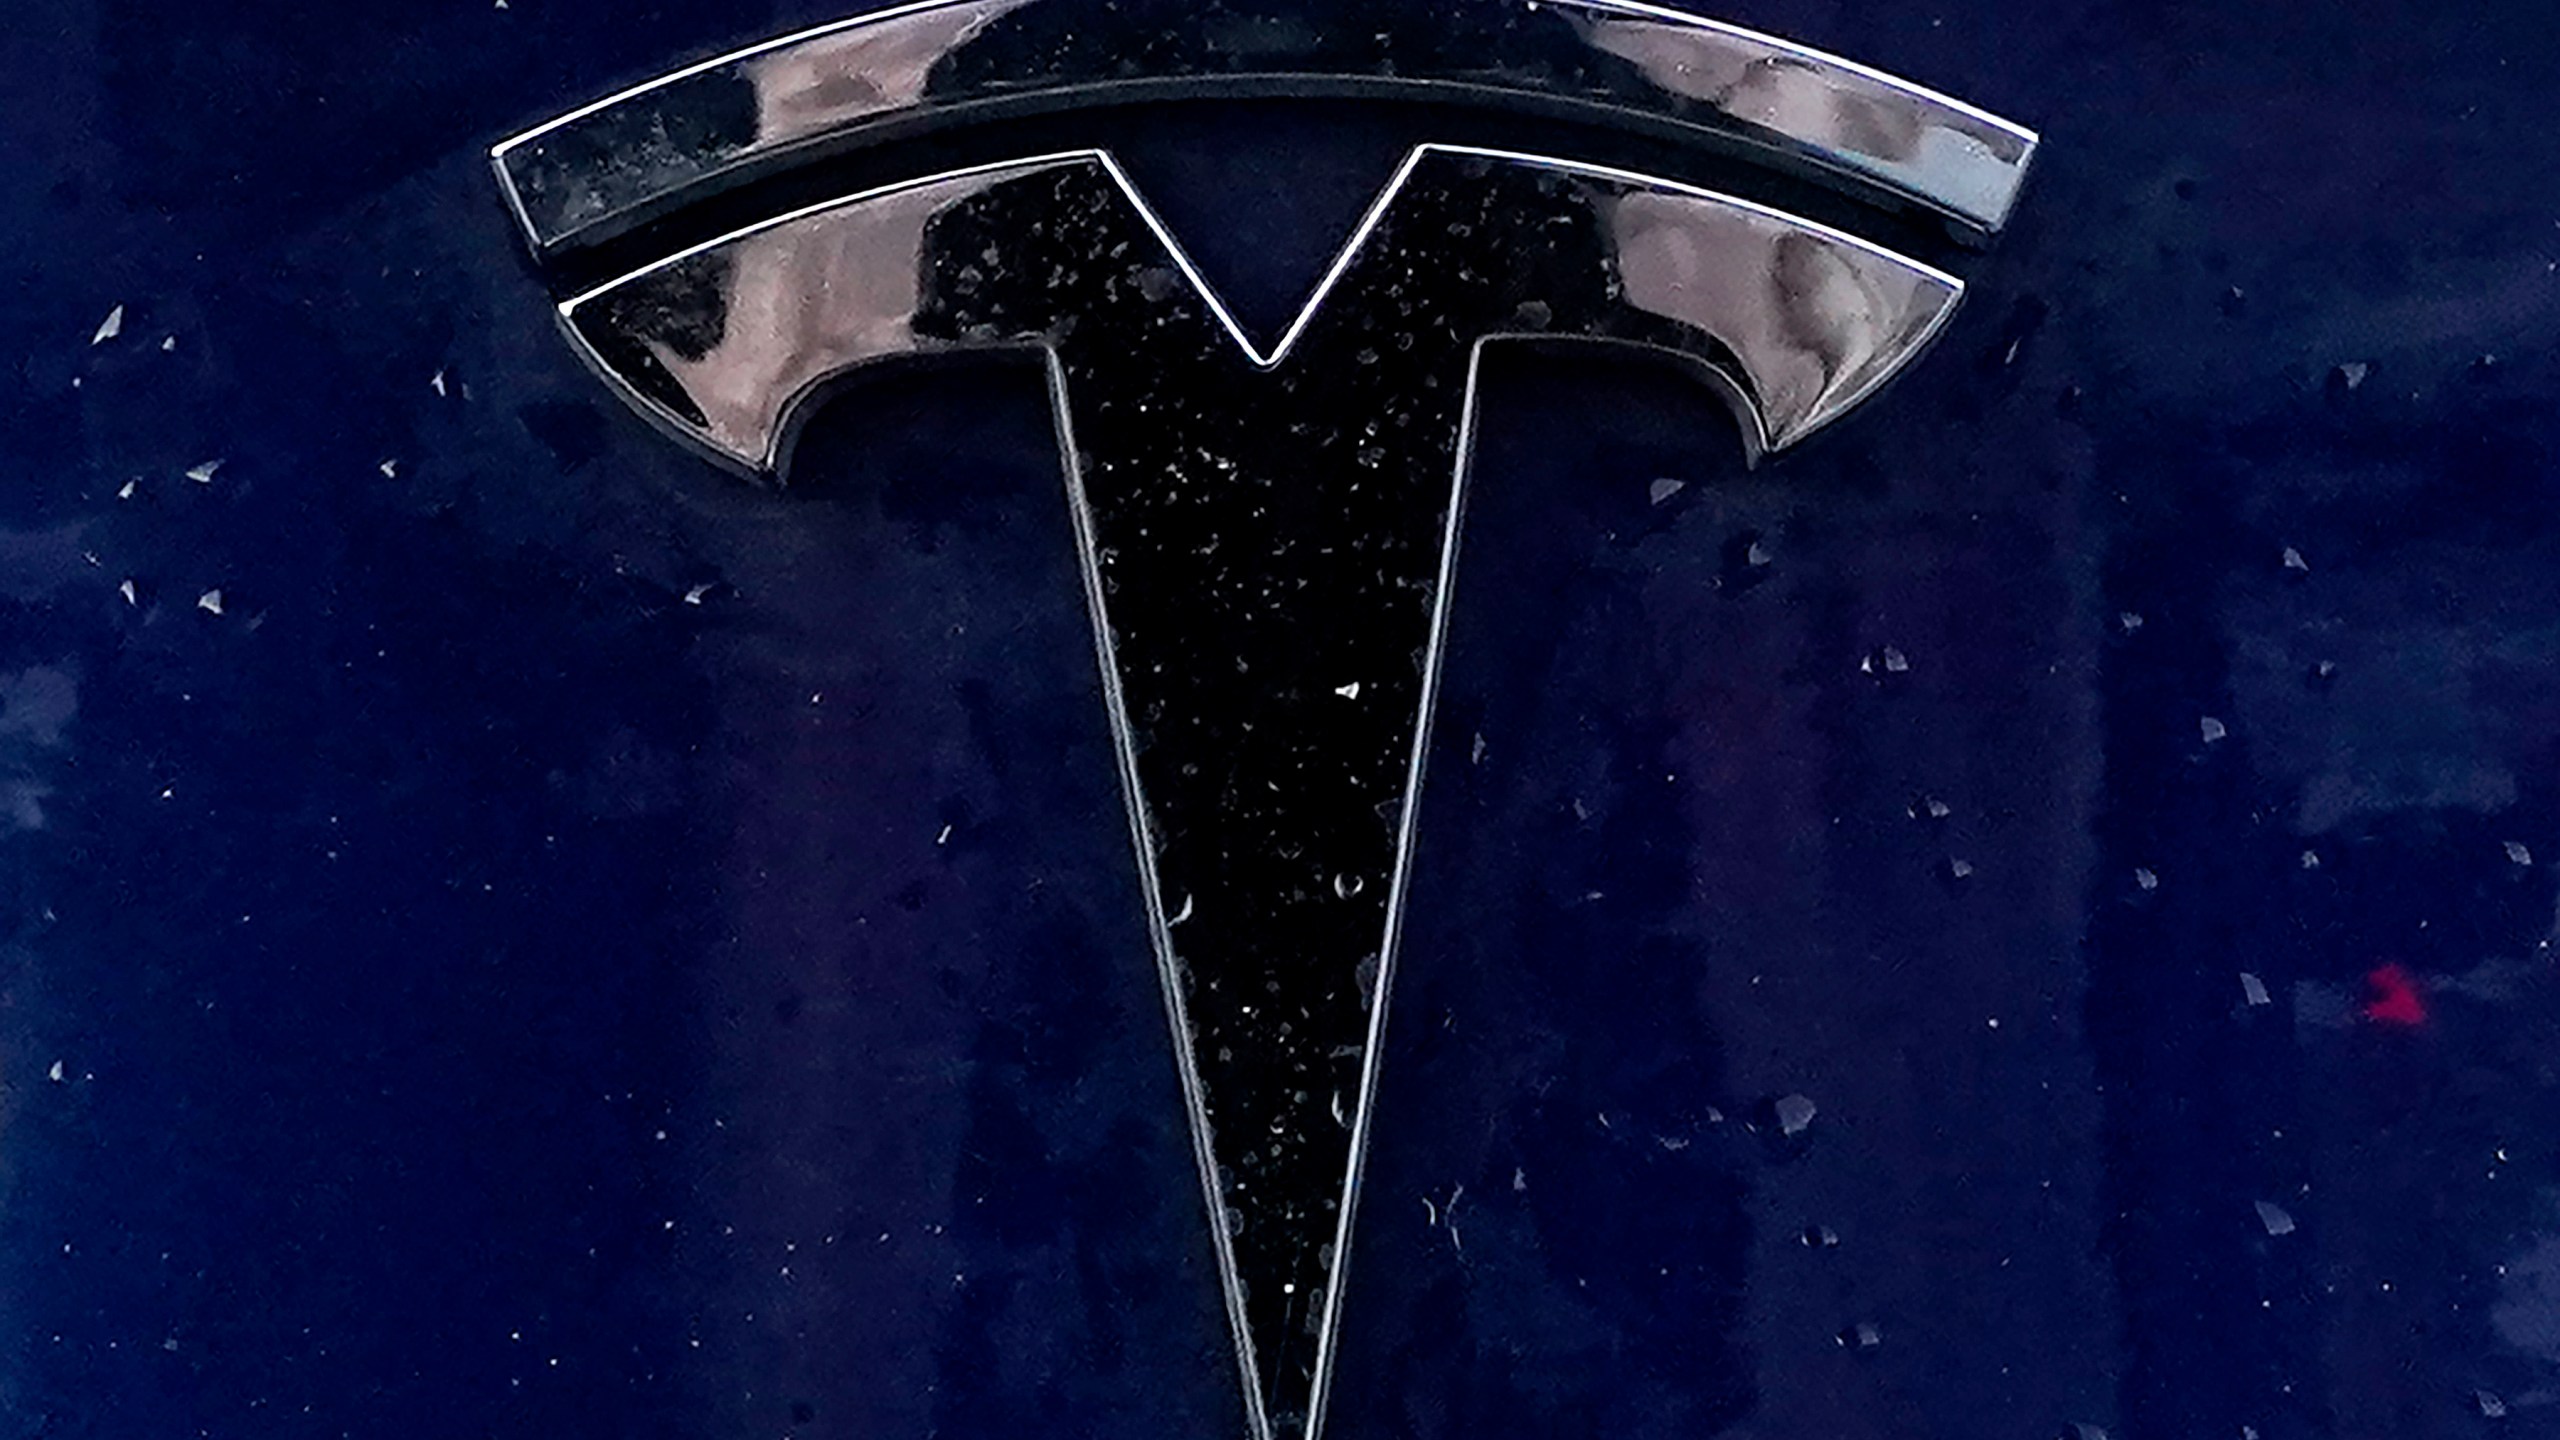 FILE - A Tesla electric vehicle emblem is affixed to a passenger vehicle Sunday, Feb. 21, 2021, in Boston. The lawyers who successfully argued that a massive pay package for Tesla CEO Elon Musk was illegal and should be voided have asked the presiding judge to award them company stock worth $5.6 billion as legal fees. The attorneys, who represented Tesla shareholders in the case decided in January, made the request of the Delaware judge in court papers filed Friday, March 1, 2024. (AP Photo/Steven Senne)